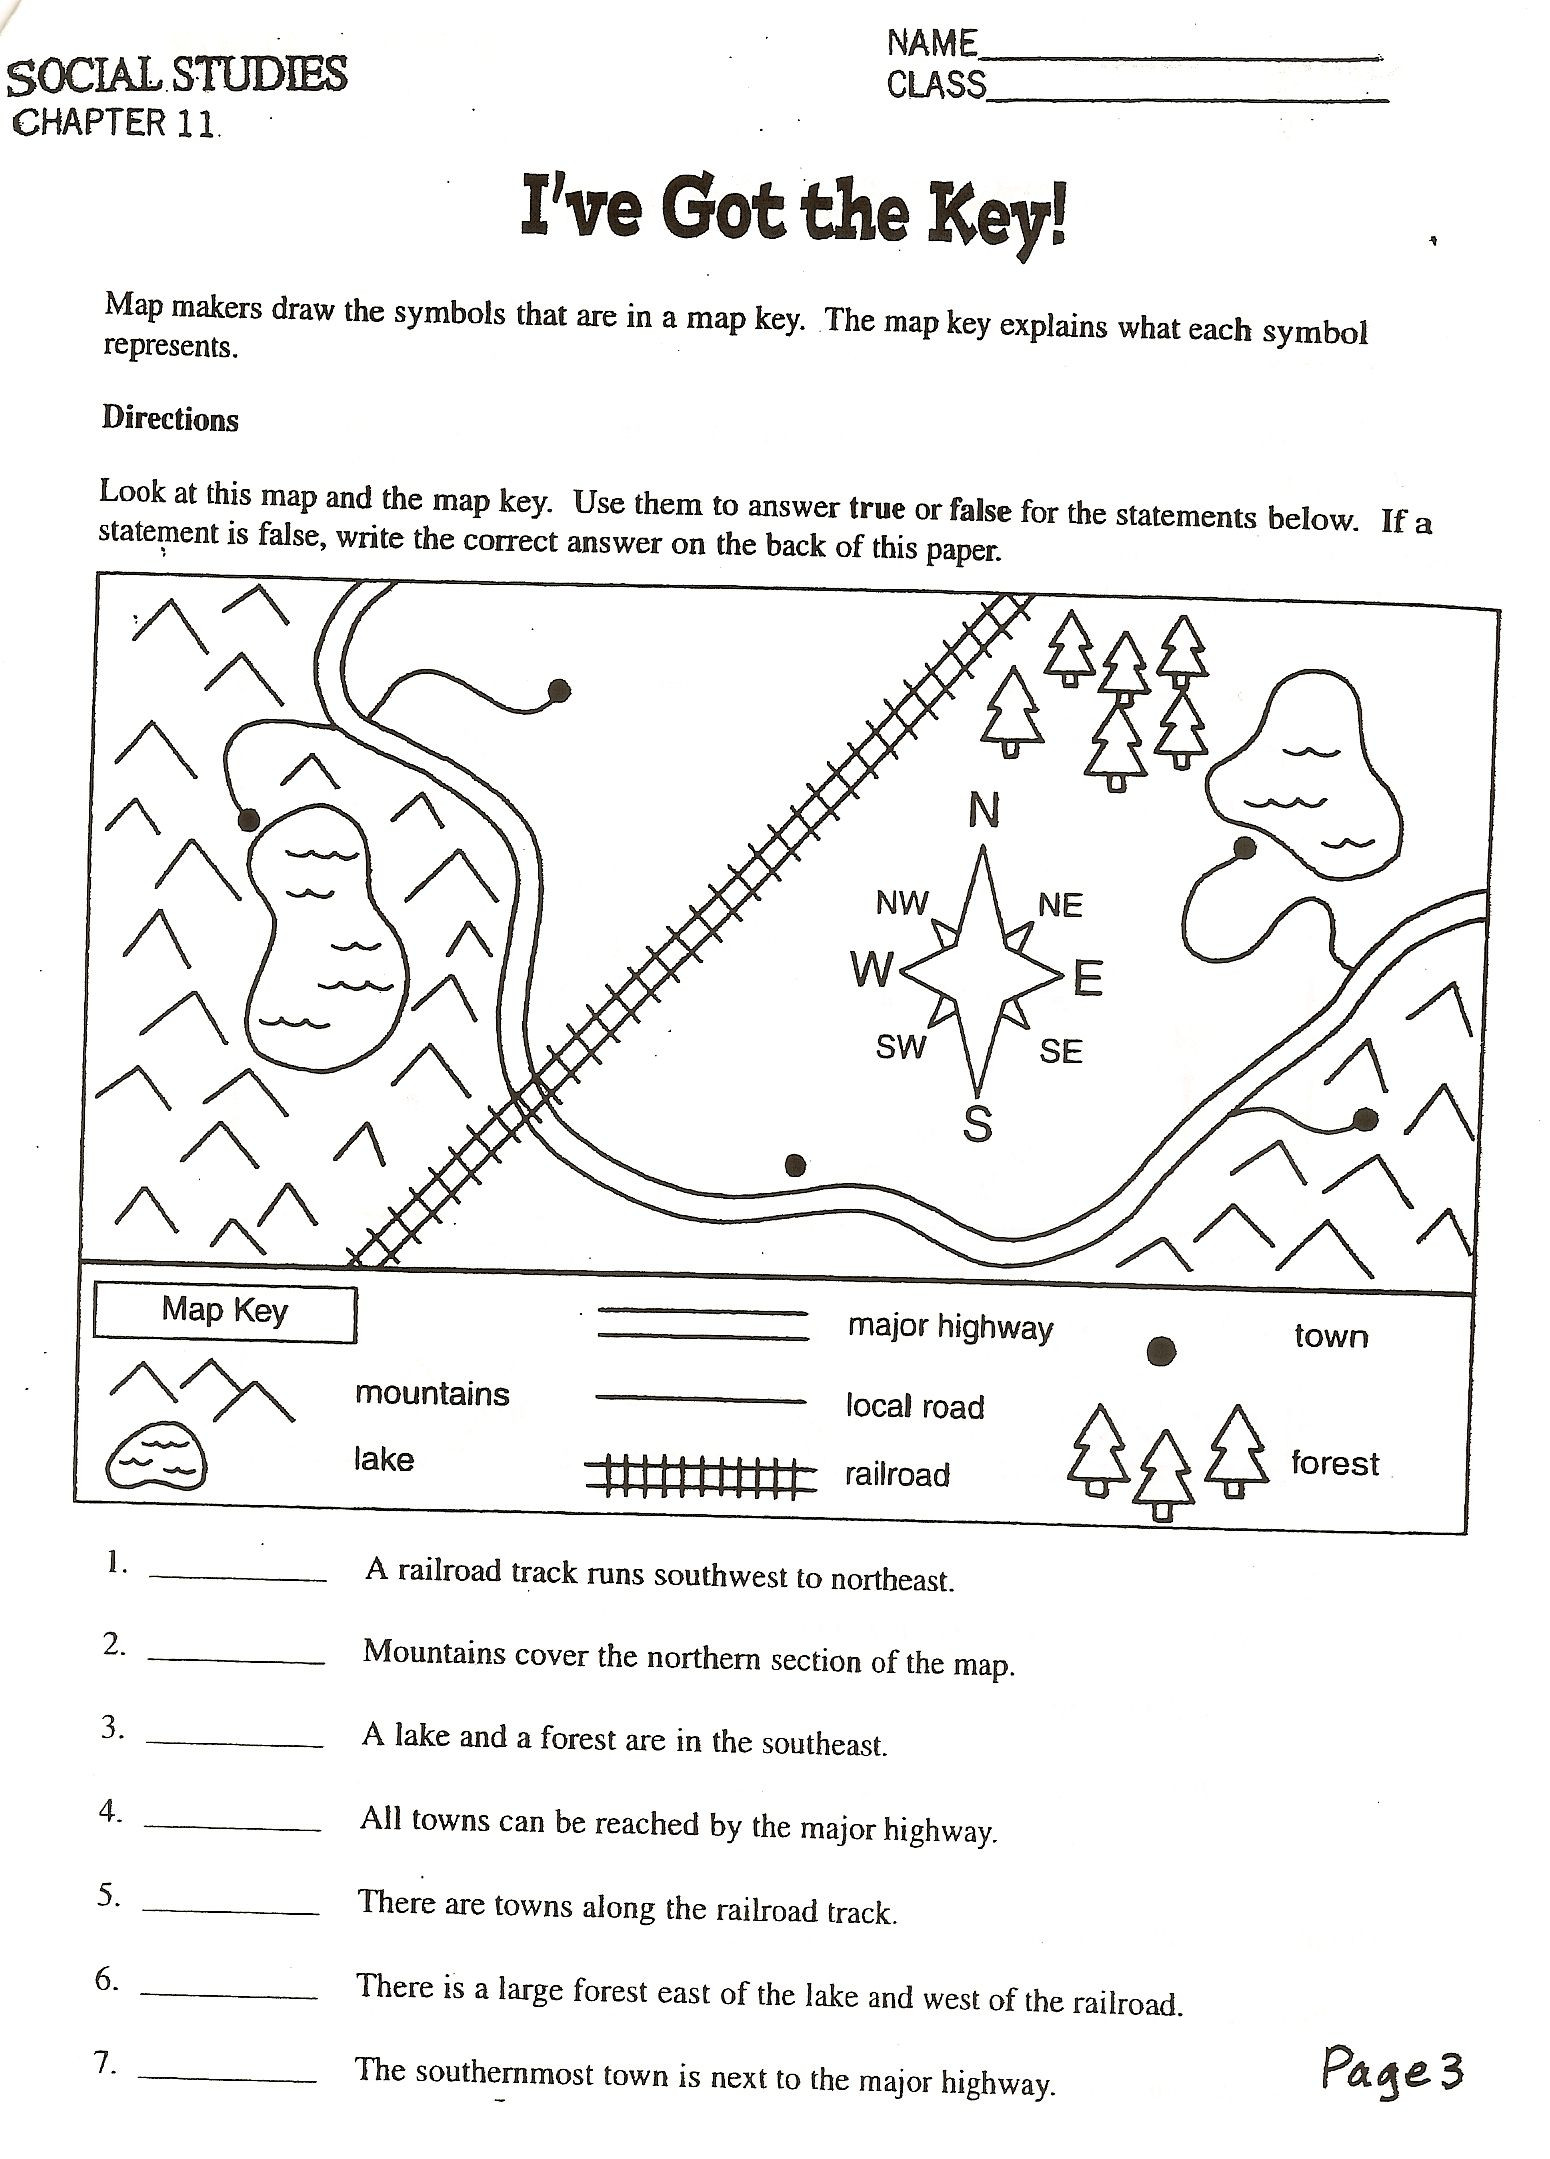 Skills Worksheet Concept Mapping social Stu S Skills with Worksheets Free Map